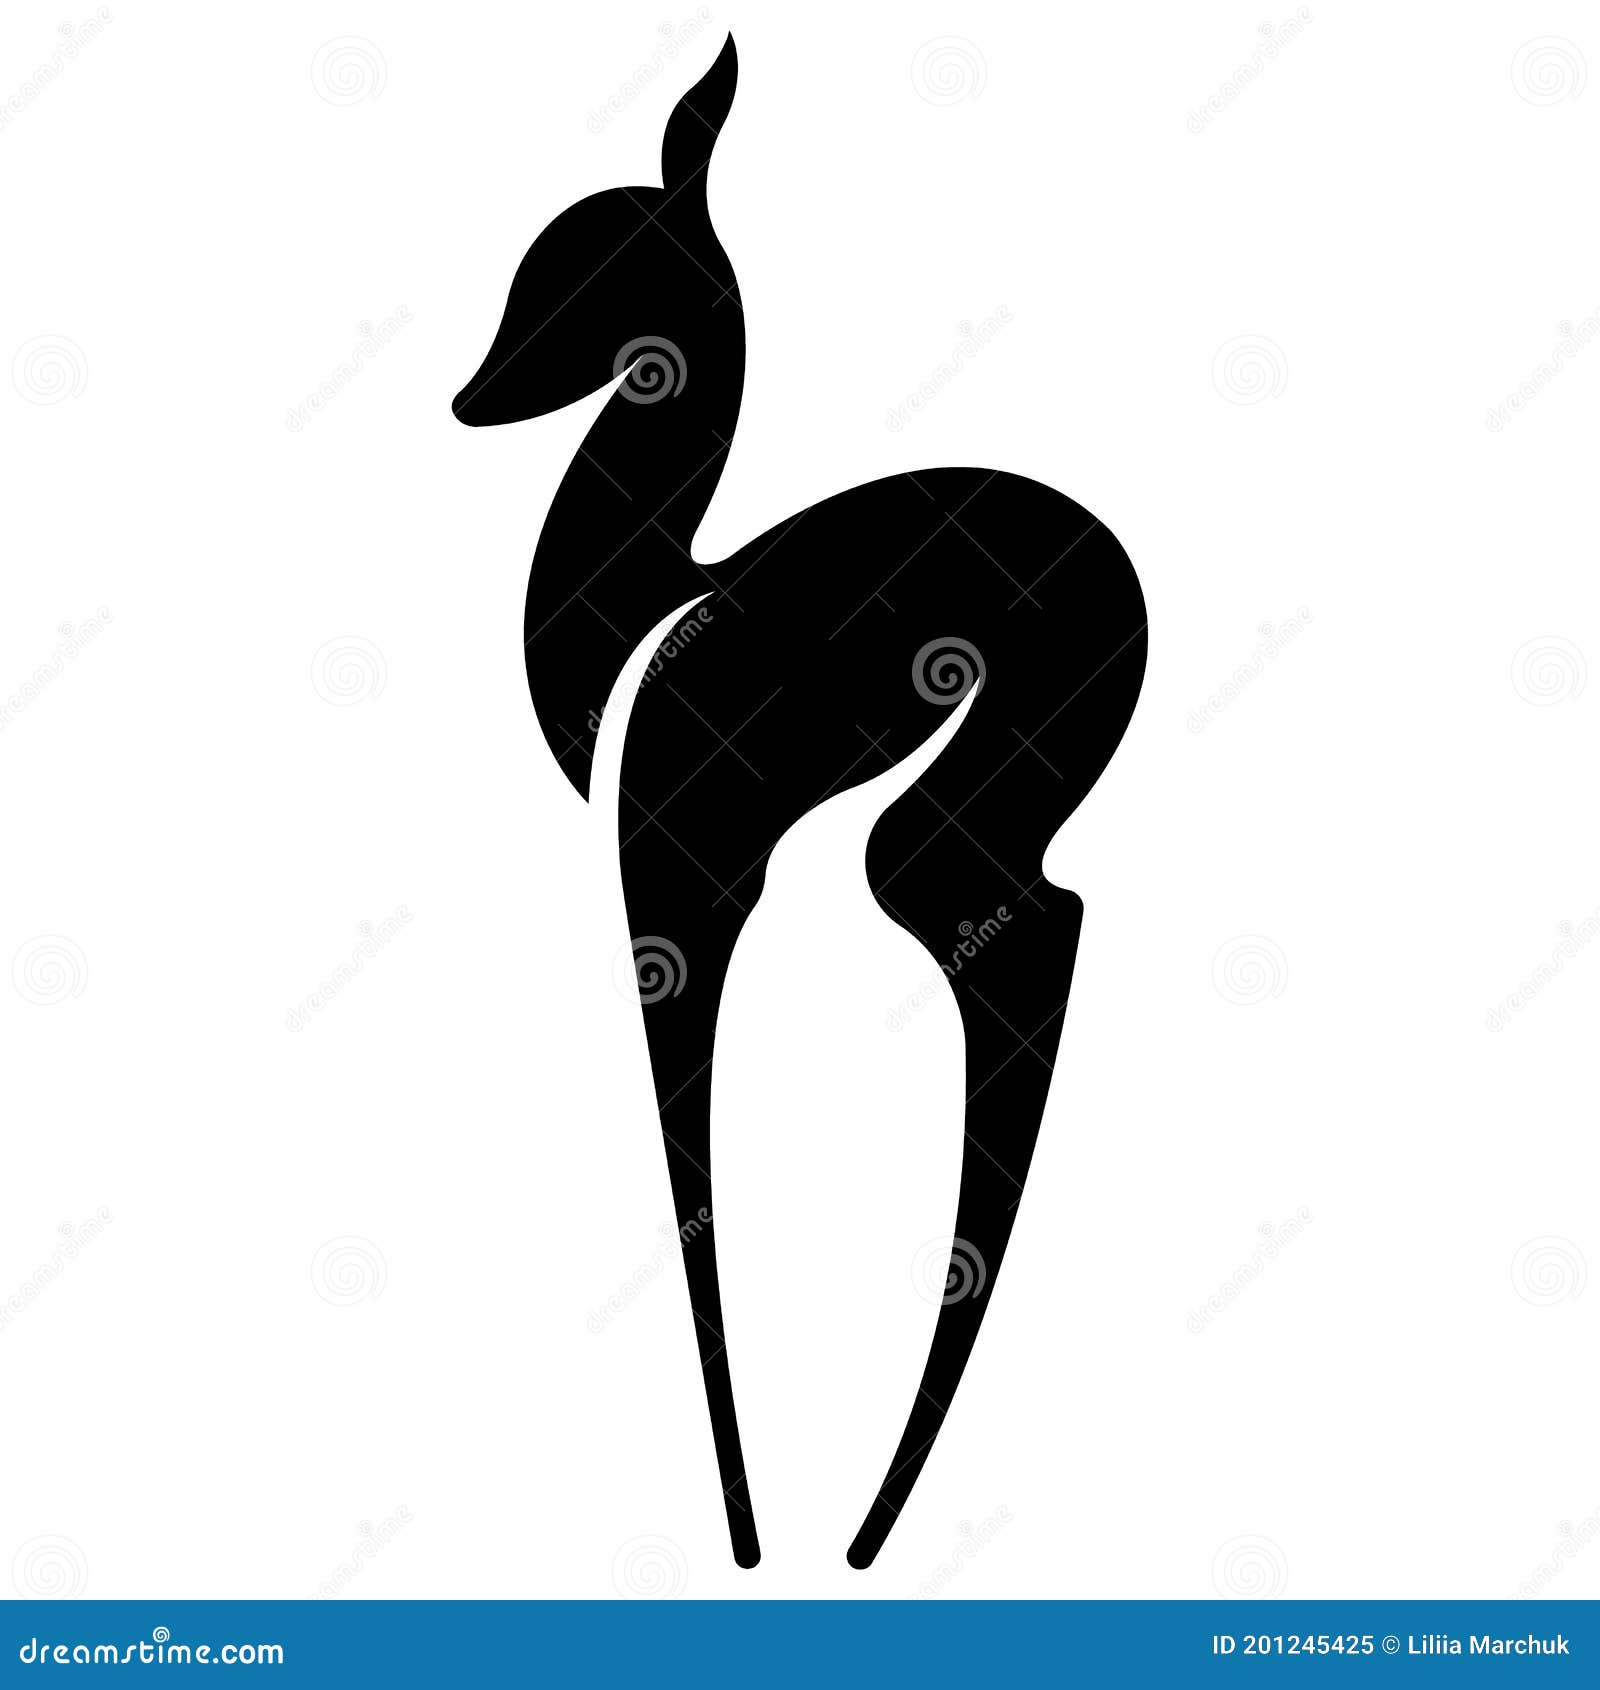 The Fawn is Drawn in Black in a Flat Style. Design Can Be Used for